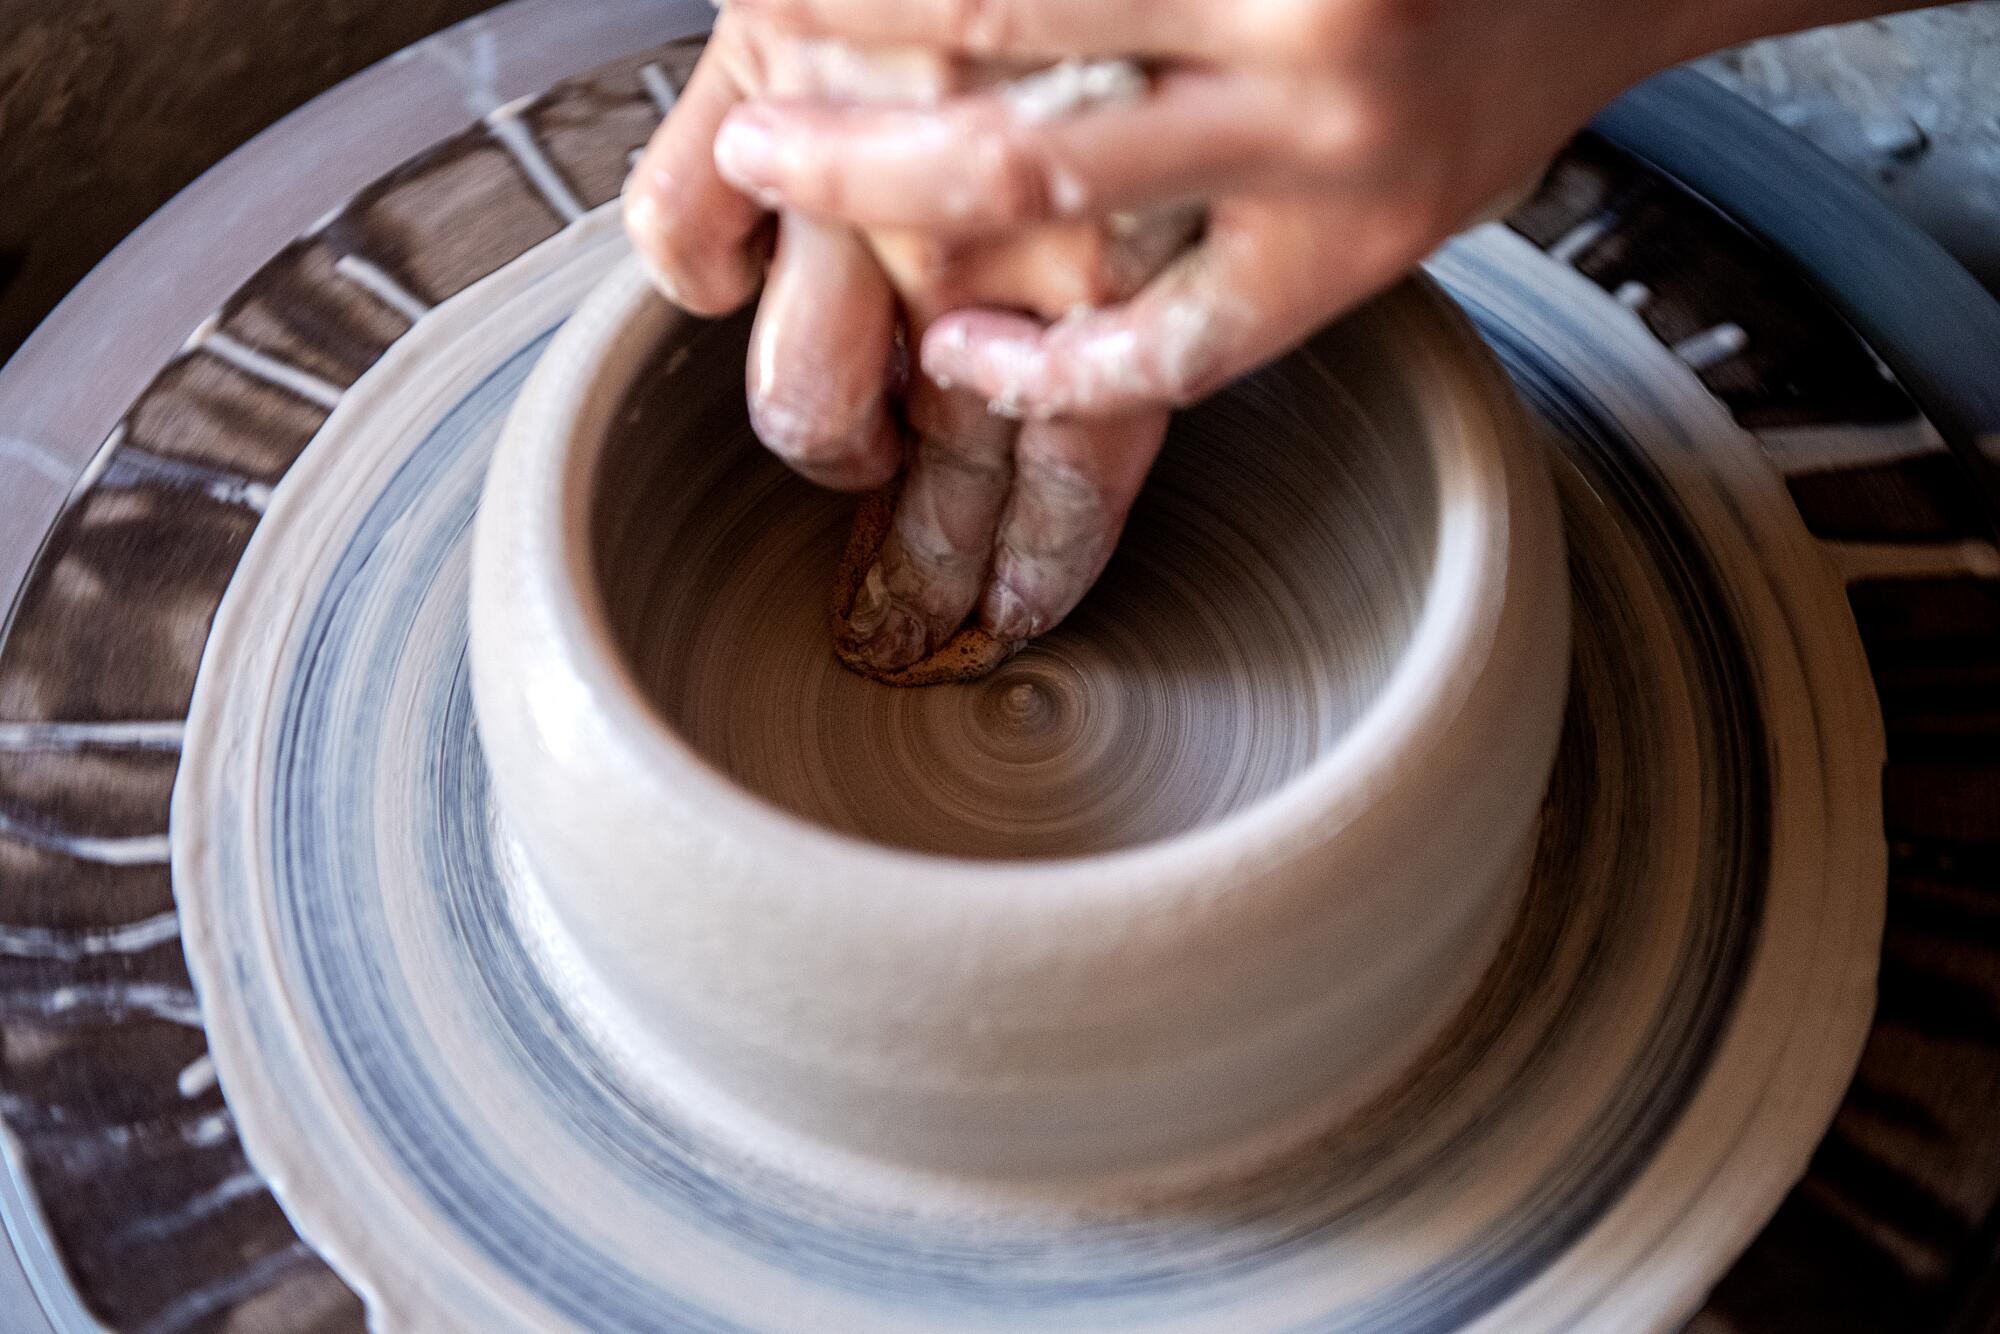 A close-up on a woman's hands as she shapes clay on a wheel.